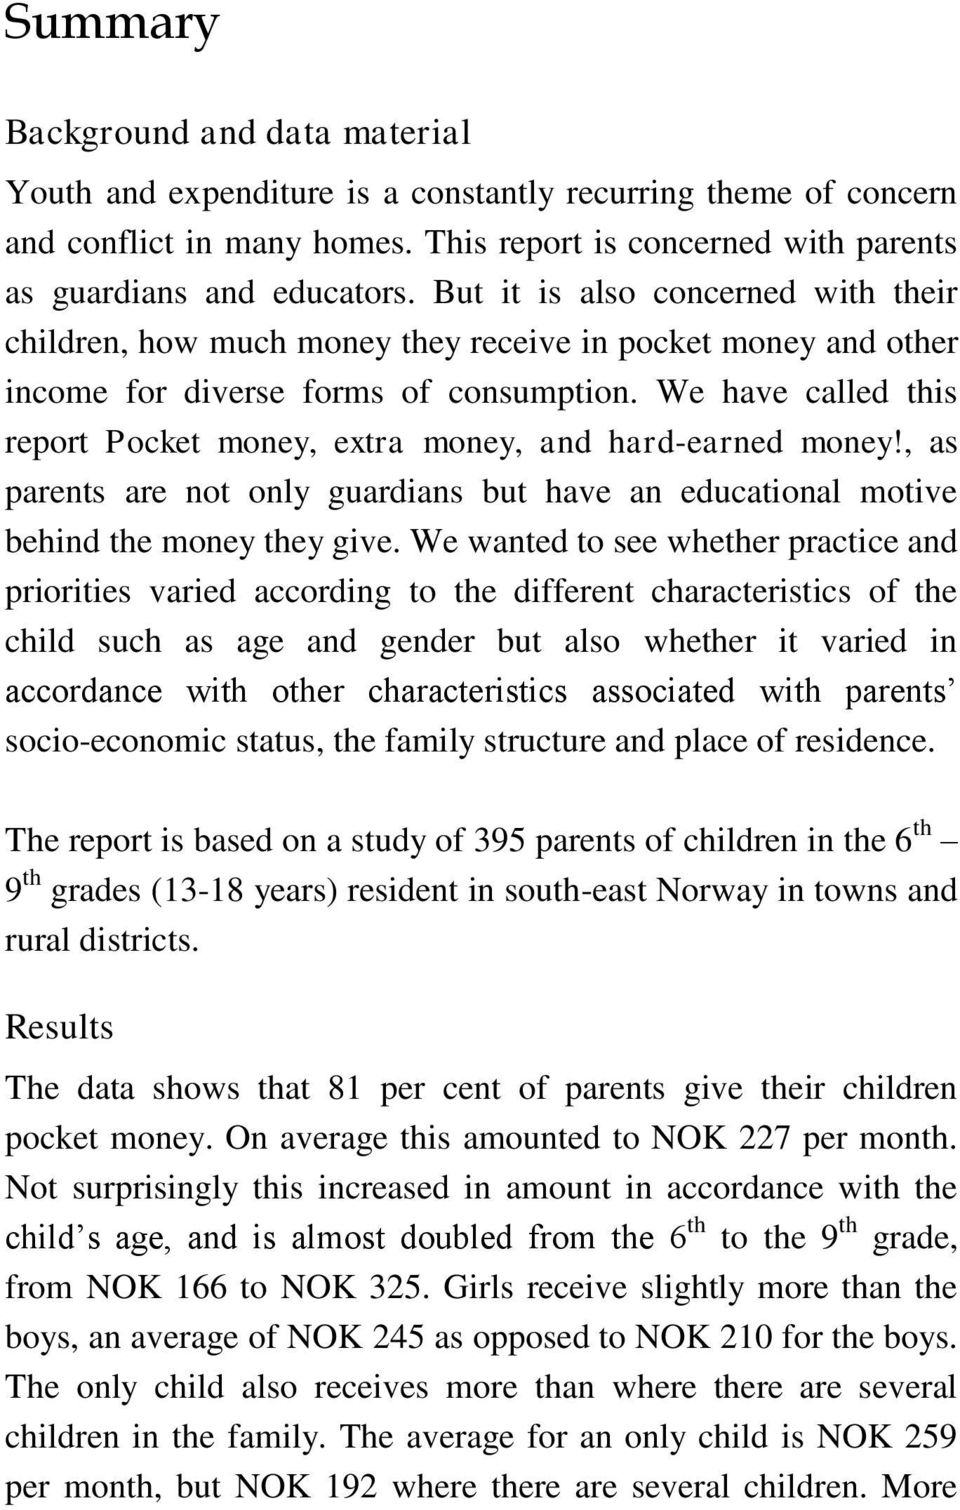 We have called this report Pocket money, extra money, and hard-earned money!, as parents are not only guardians but have an educational motive behind the money they give.